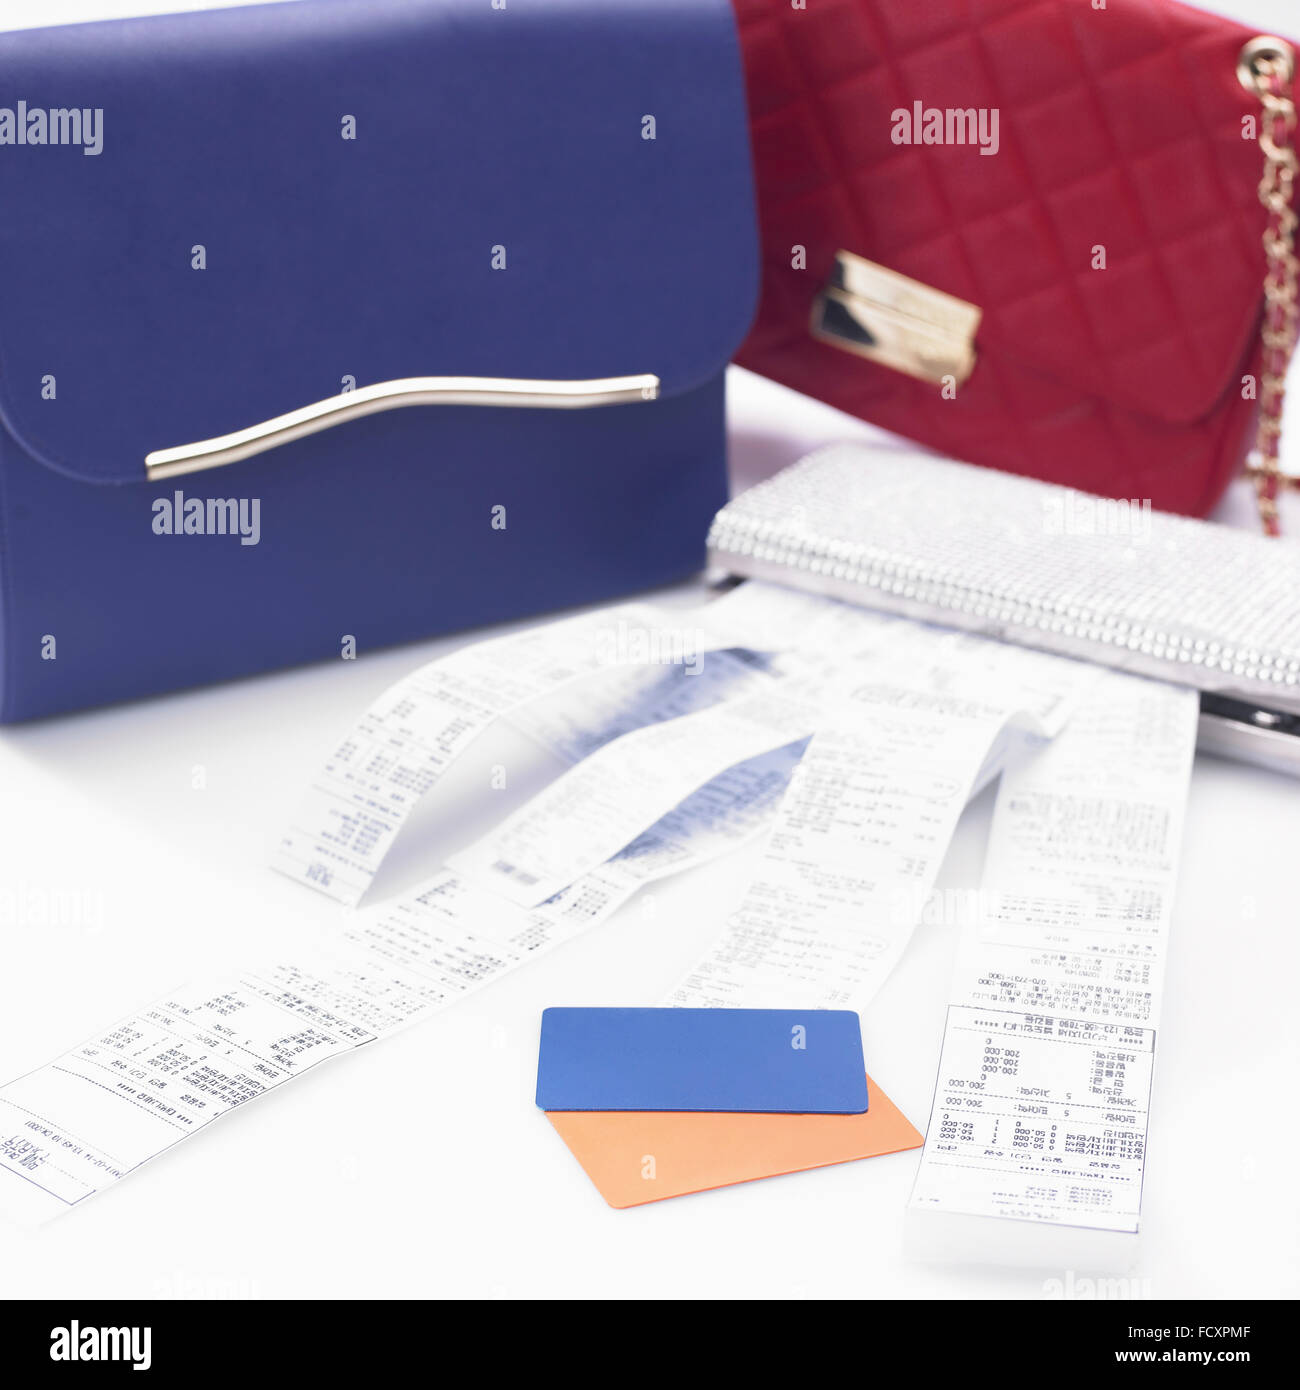 Credit cards and lots of receipts with bags Stock Photo